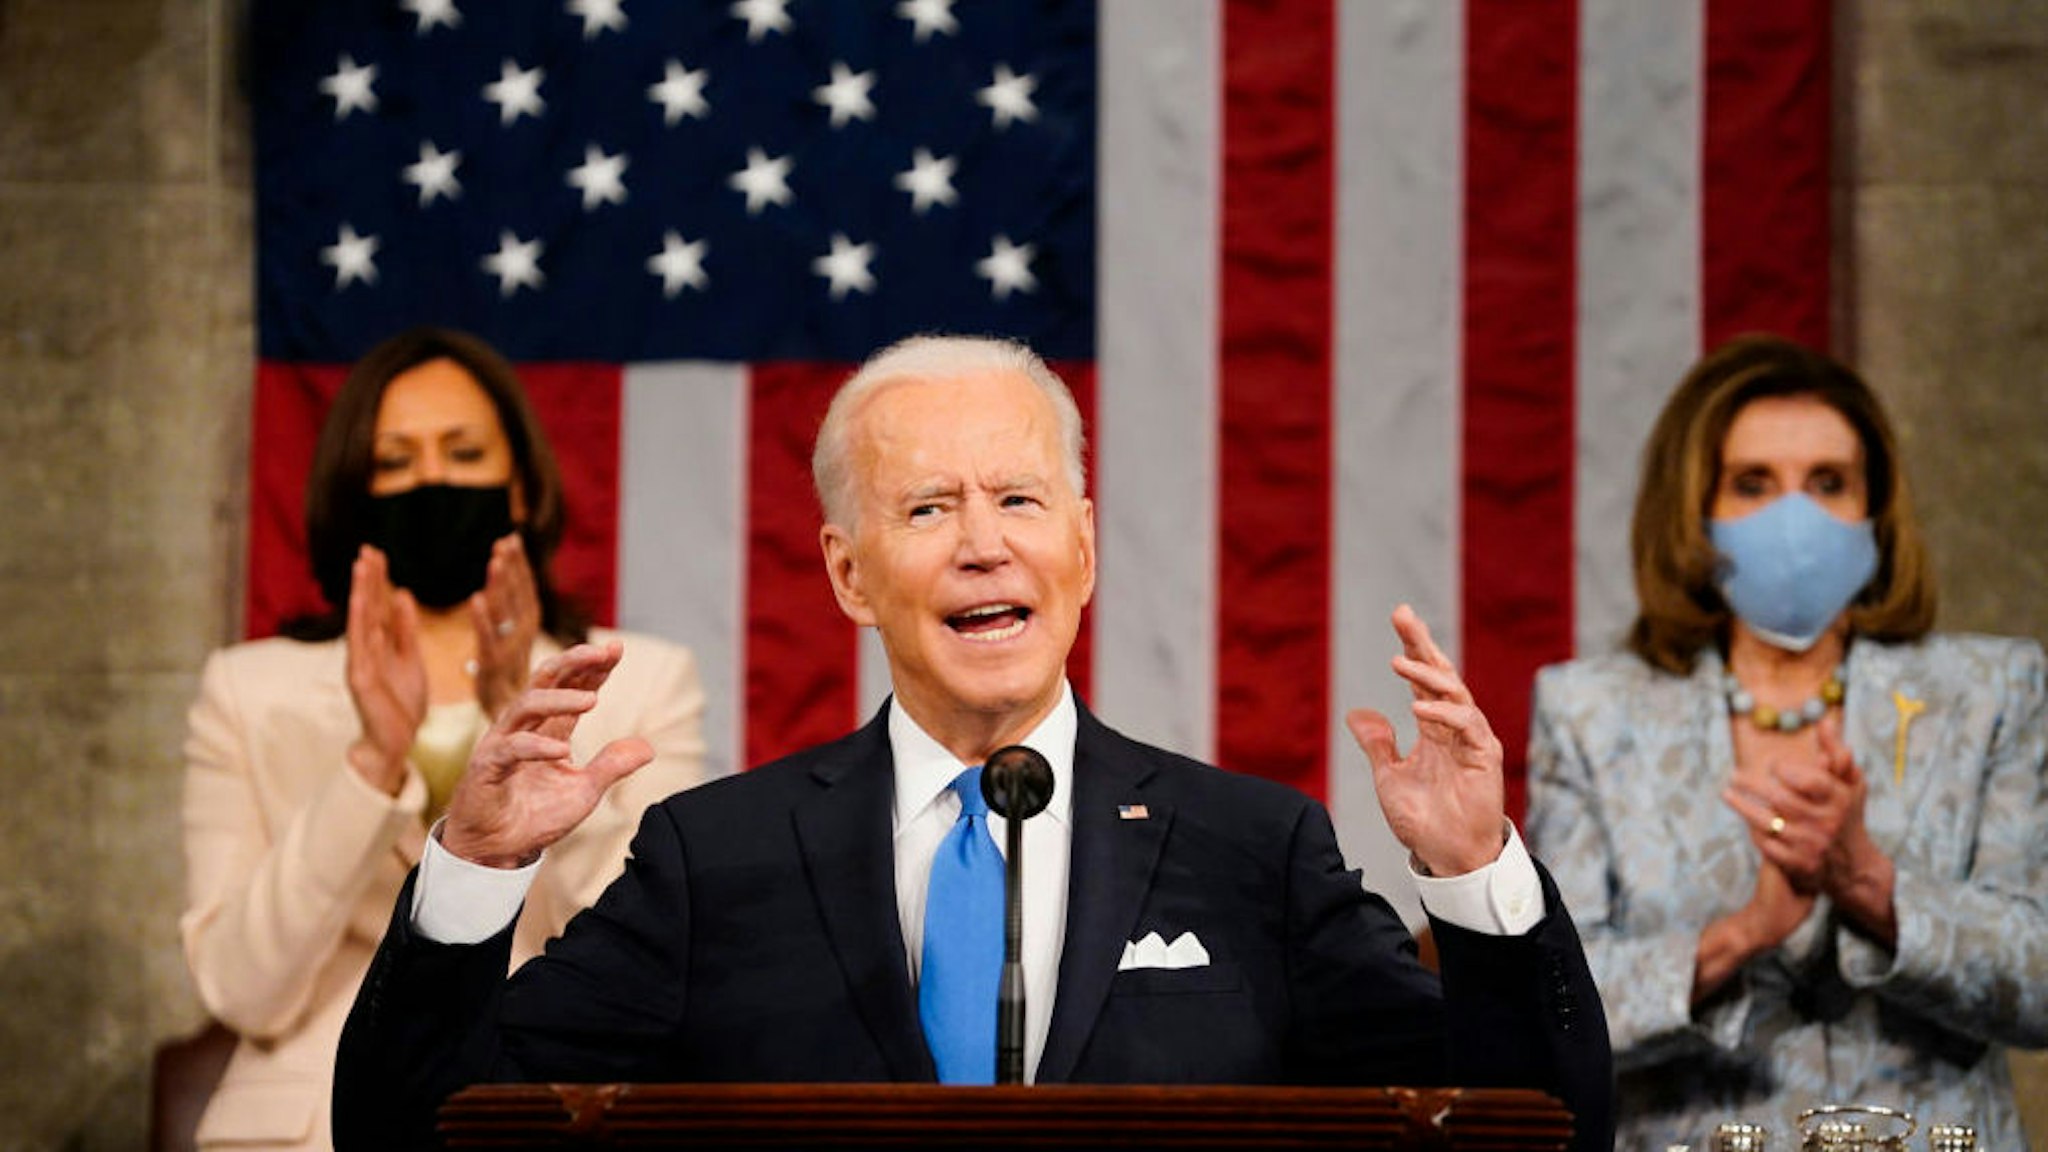 WASHINGTON, DC - APRIL 28: President Joe Biden addresses a joint session of Congress, with Vice President Kamala Harris and House Speaker Nancy Pelosi (D-CA) on the dais behind him on April 28, 2021 in Washington, DC. On the eve of his 100th day in office, Biden spoke about his plan to revive America’s economy and health as it continues to recover from a devastating pandemic. He delivered his speech before 200 invited lawmakers and other government officials instead of the normal 1600 guests because of the ongoing COVID-19 pandemic.